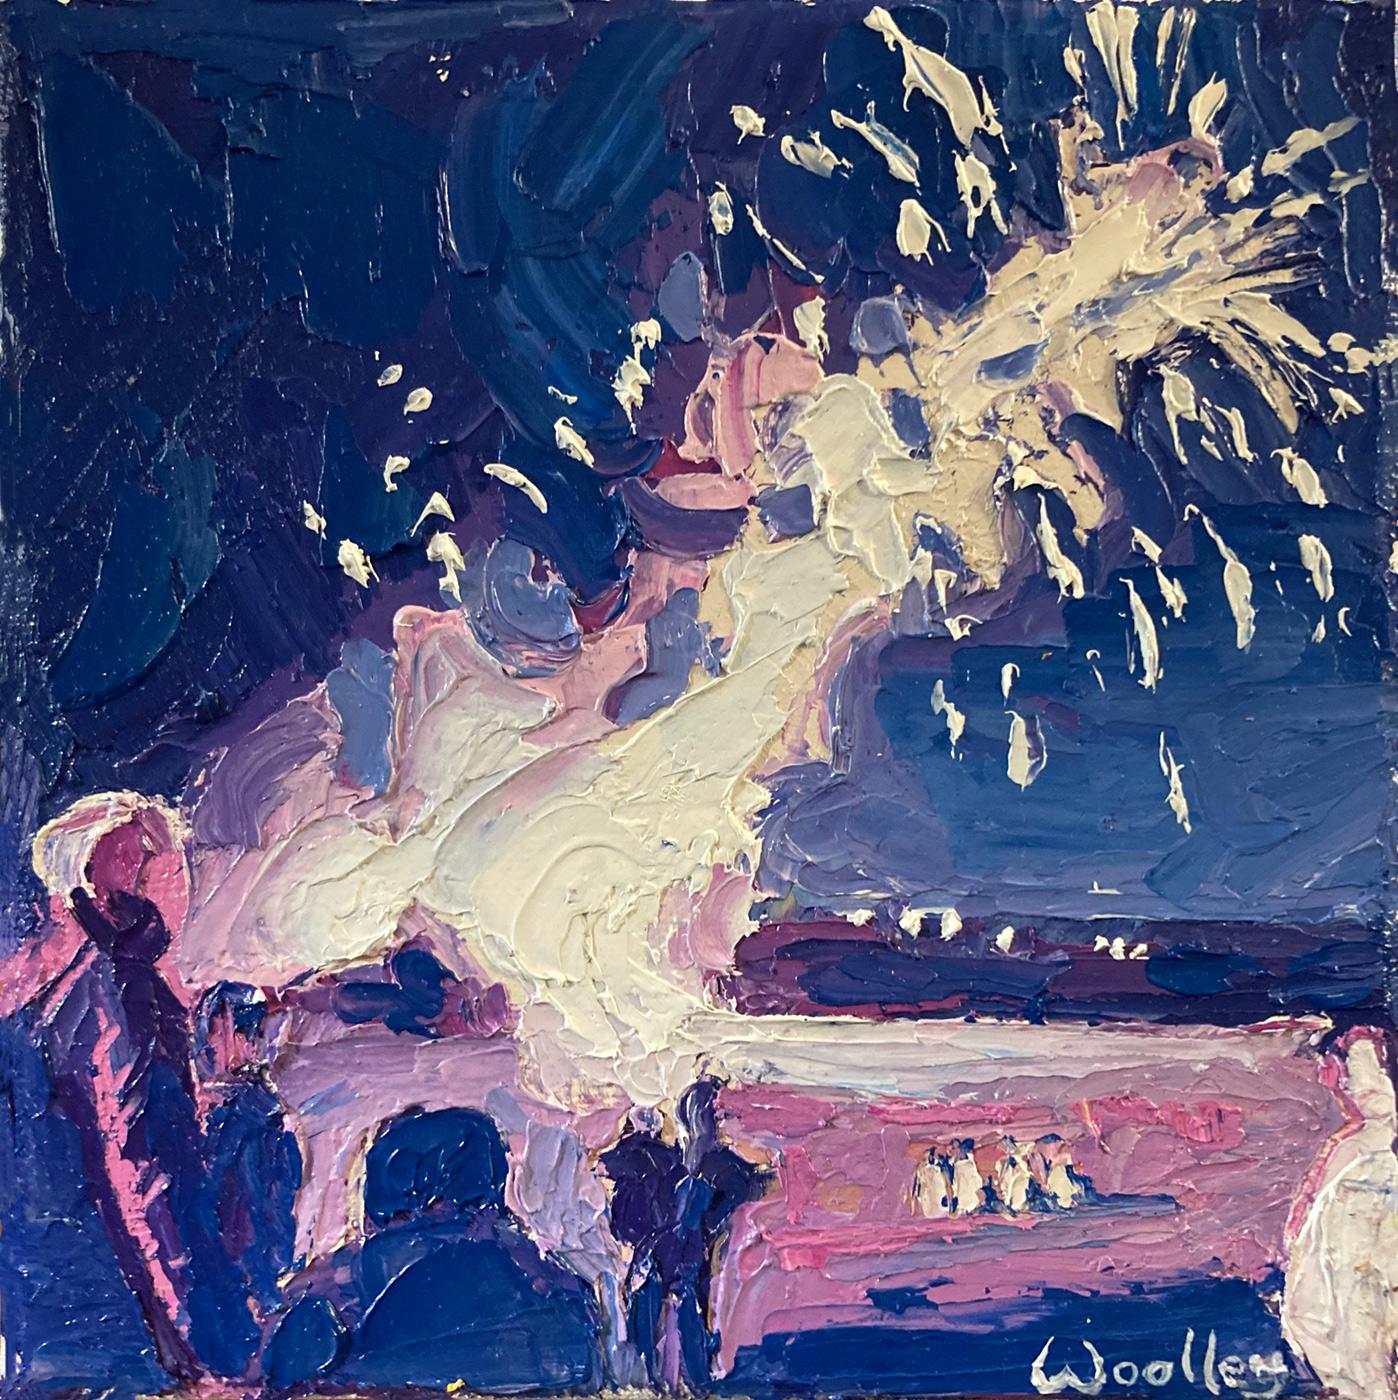 Watching the Fireworks [November 2022]

original
Oil Paint on Canvas
Image size: H:15 cm x W:15 cm
Complete Size of Unframed Work: H:15 cm x W:15 cm x D:2cm
Sold Unframed
Please note that insitu images are purely an indication of how a piece may